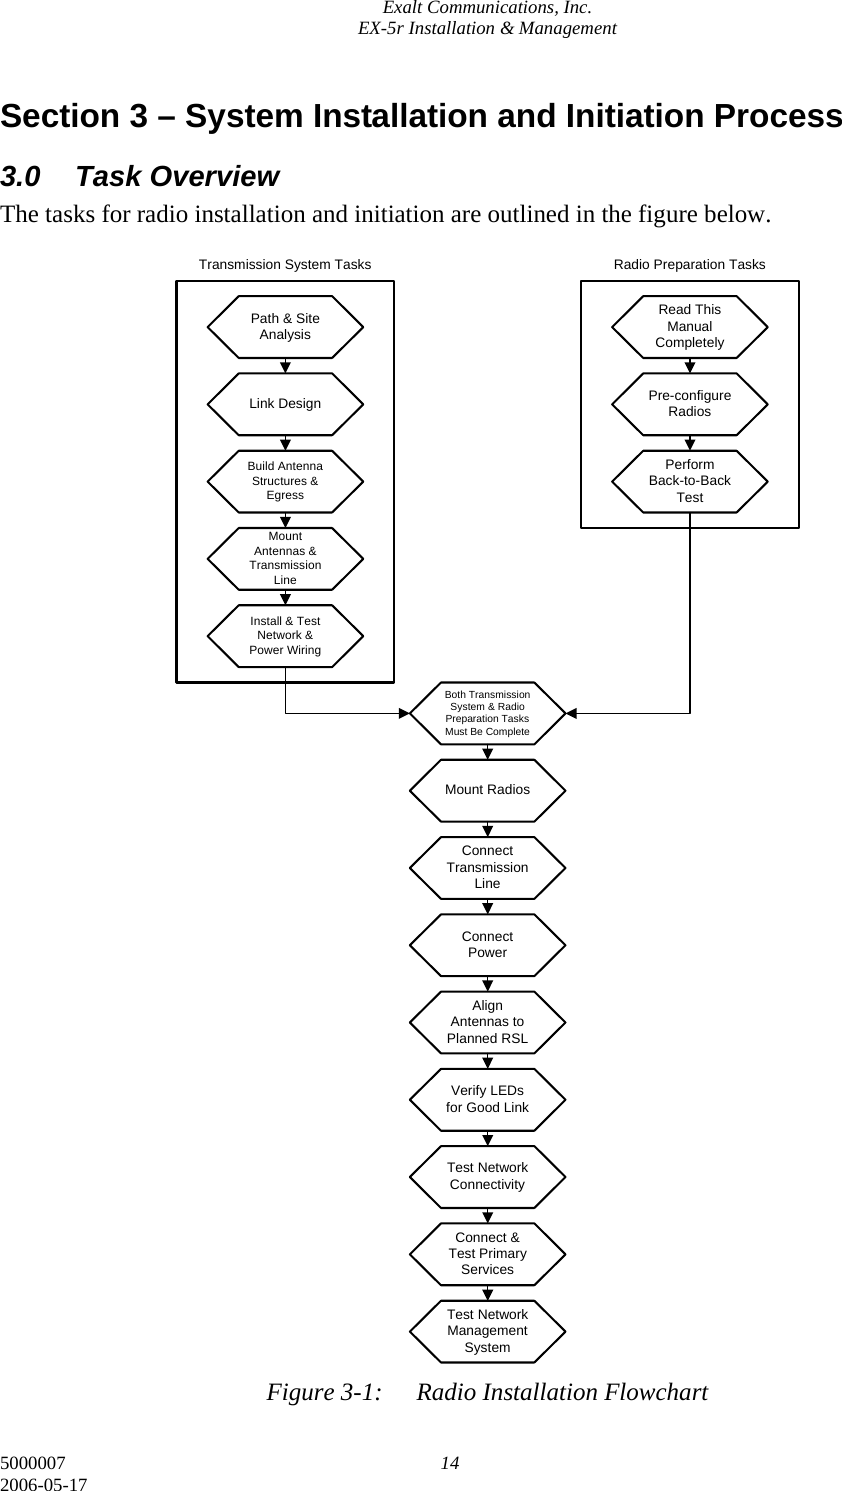 Exalt Communications, Inc. EX-5r Installation &amp; Management 5000007  14 2006-05-17 Section 3 – System Installation and Initiation Process 3.0 Task Overview The tasks for radio installation and initiation are outlined in the figure below.                                         Figure 3-1:  Radio Installation Flowchart Path &amp; Site AnalysisLink DesignBuild Antenna Structures &amp; EgressMount Antennas &amp; Transmission LineInstall &amp; Test Network &amp; Power WiringRead This Manual CompletelyPre-configure RadiosPerform Back-to-Back TestMount RadiosConnect Transmission LineConnect PowerAlign Antennas to Planned RSLVerify LEDs for Good LinkTest Network ConnectivityConnect &amp; Test Primary ServicesTest Network Management SystemBoth Transmission System &amp; Radio Preparation Tasks Must Be CompleteTransmission System Tasks Radio Preparation Tasks